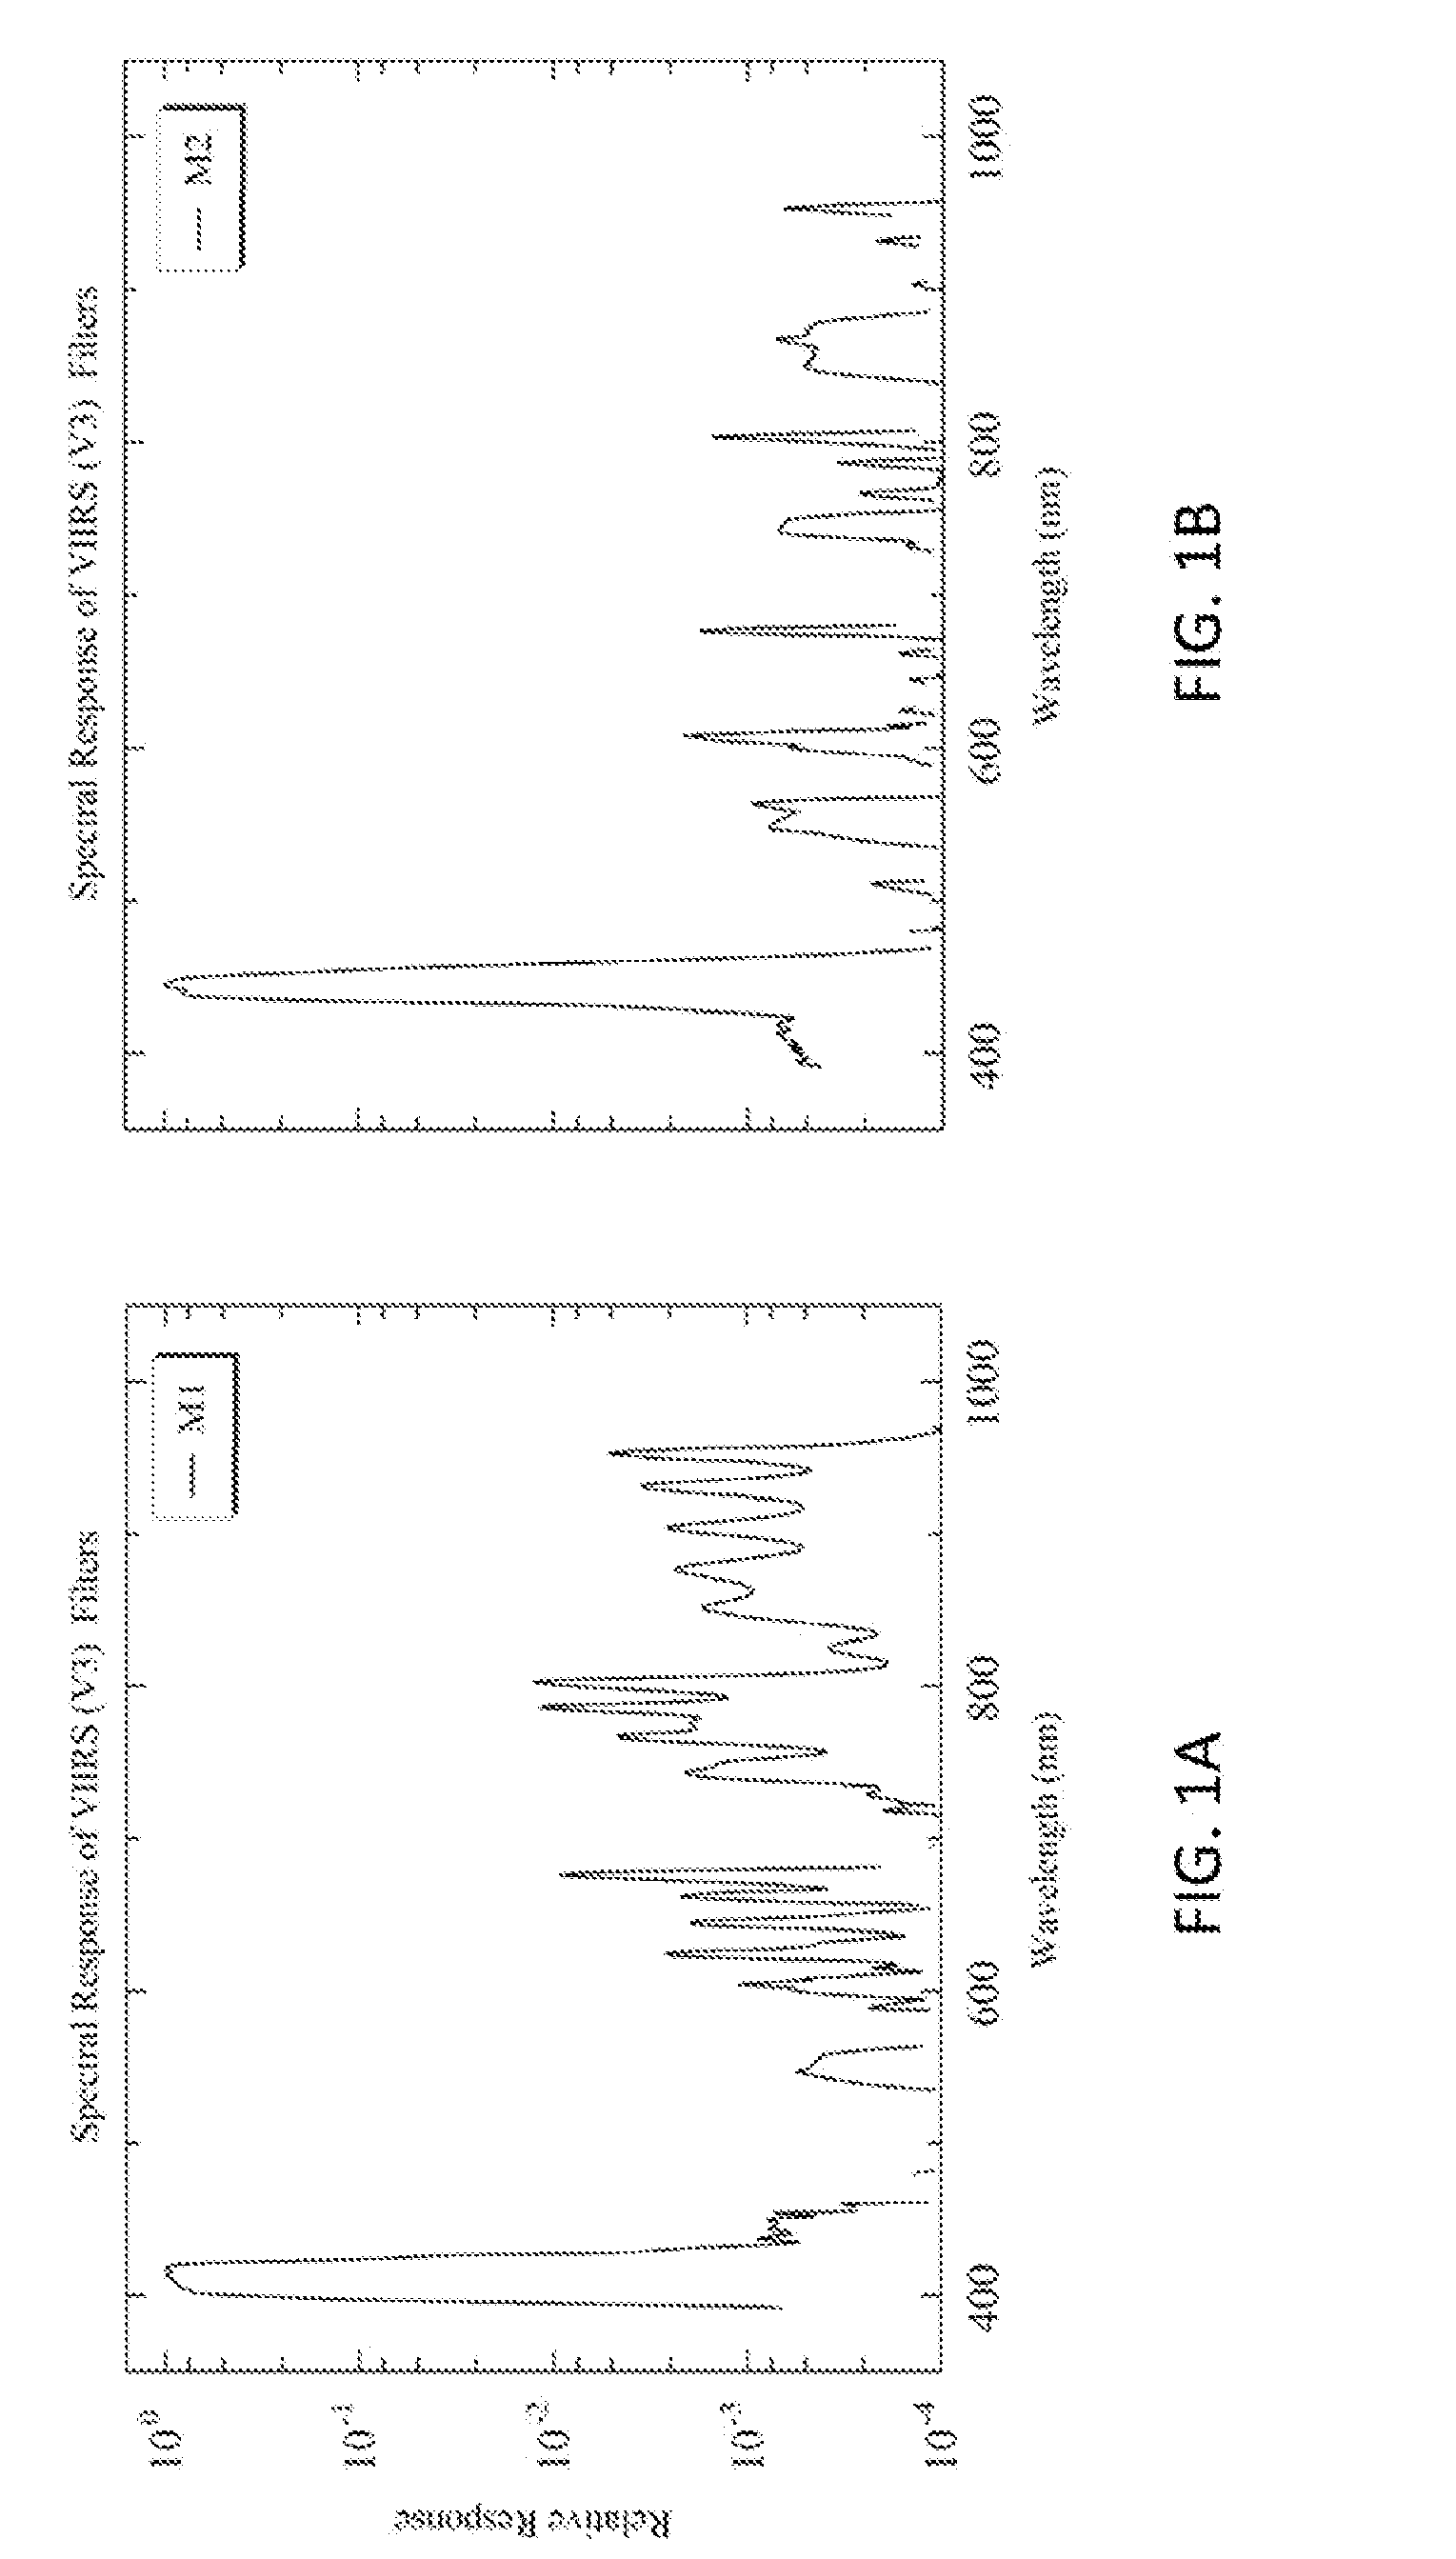 Method of multispectral decomposition for the removal of out-of-band effects